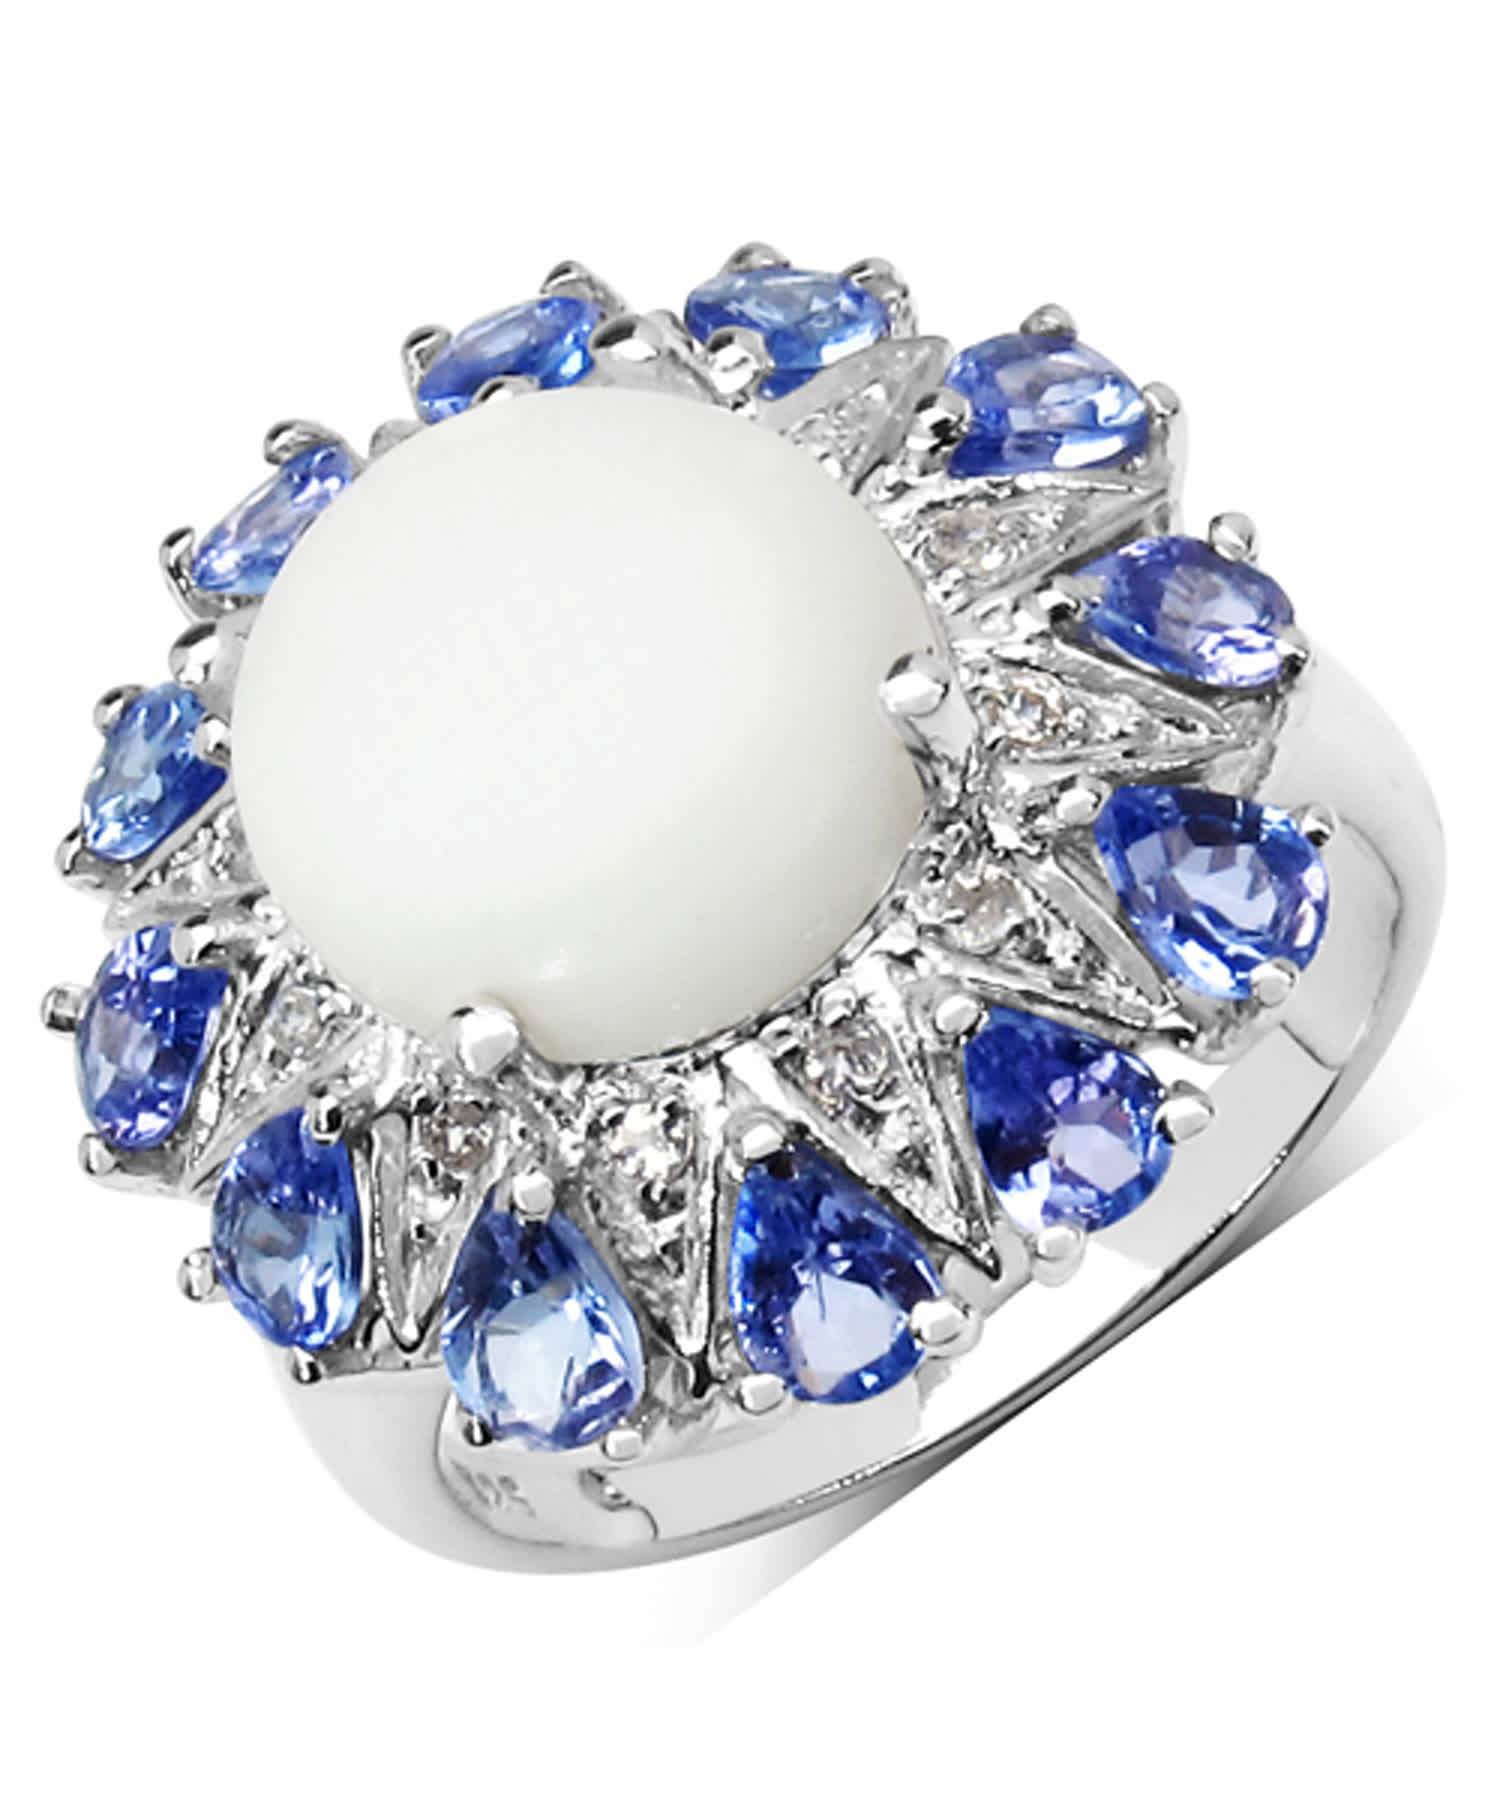 4.25ctw Natural Opal, Tanzanite and Topaz Rhodium Plated 925 Sterling Silver Cocktail Ring View 1